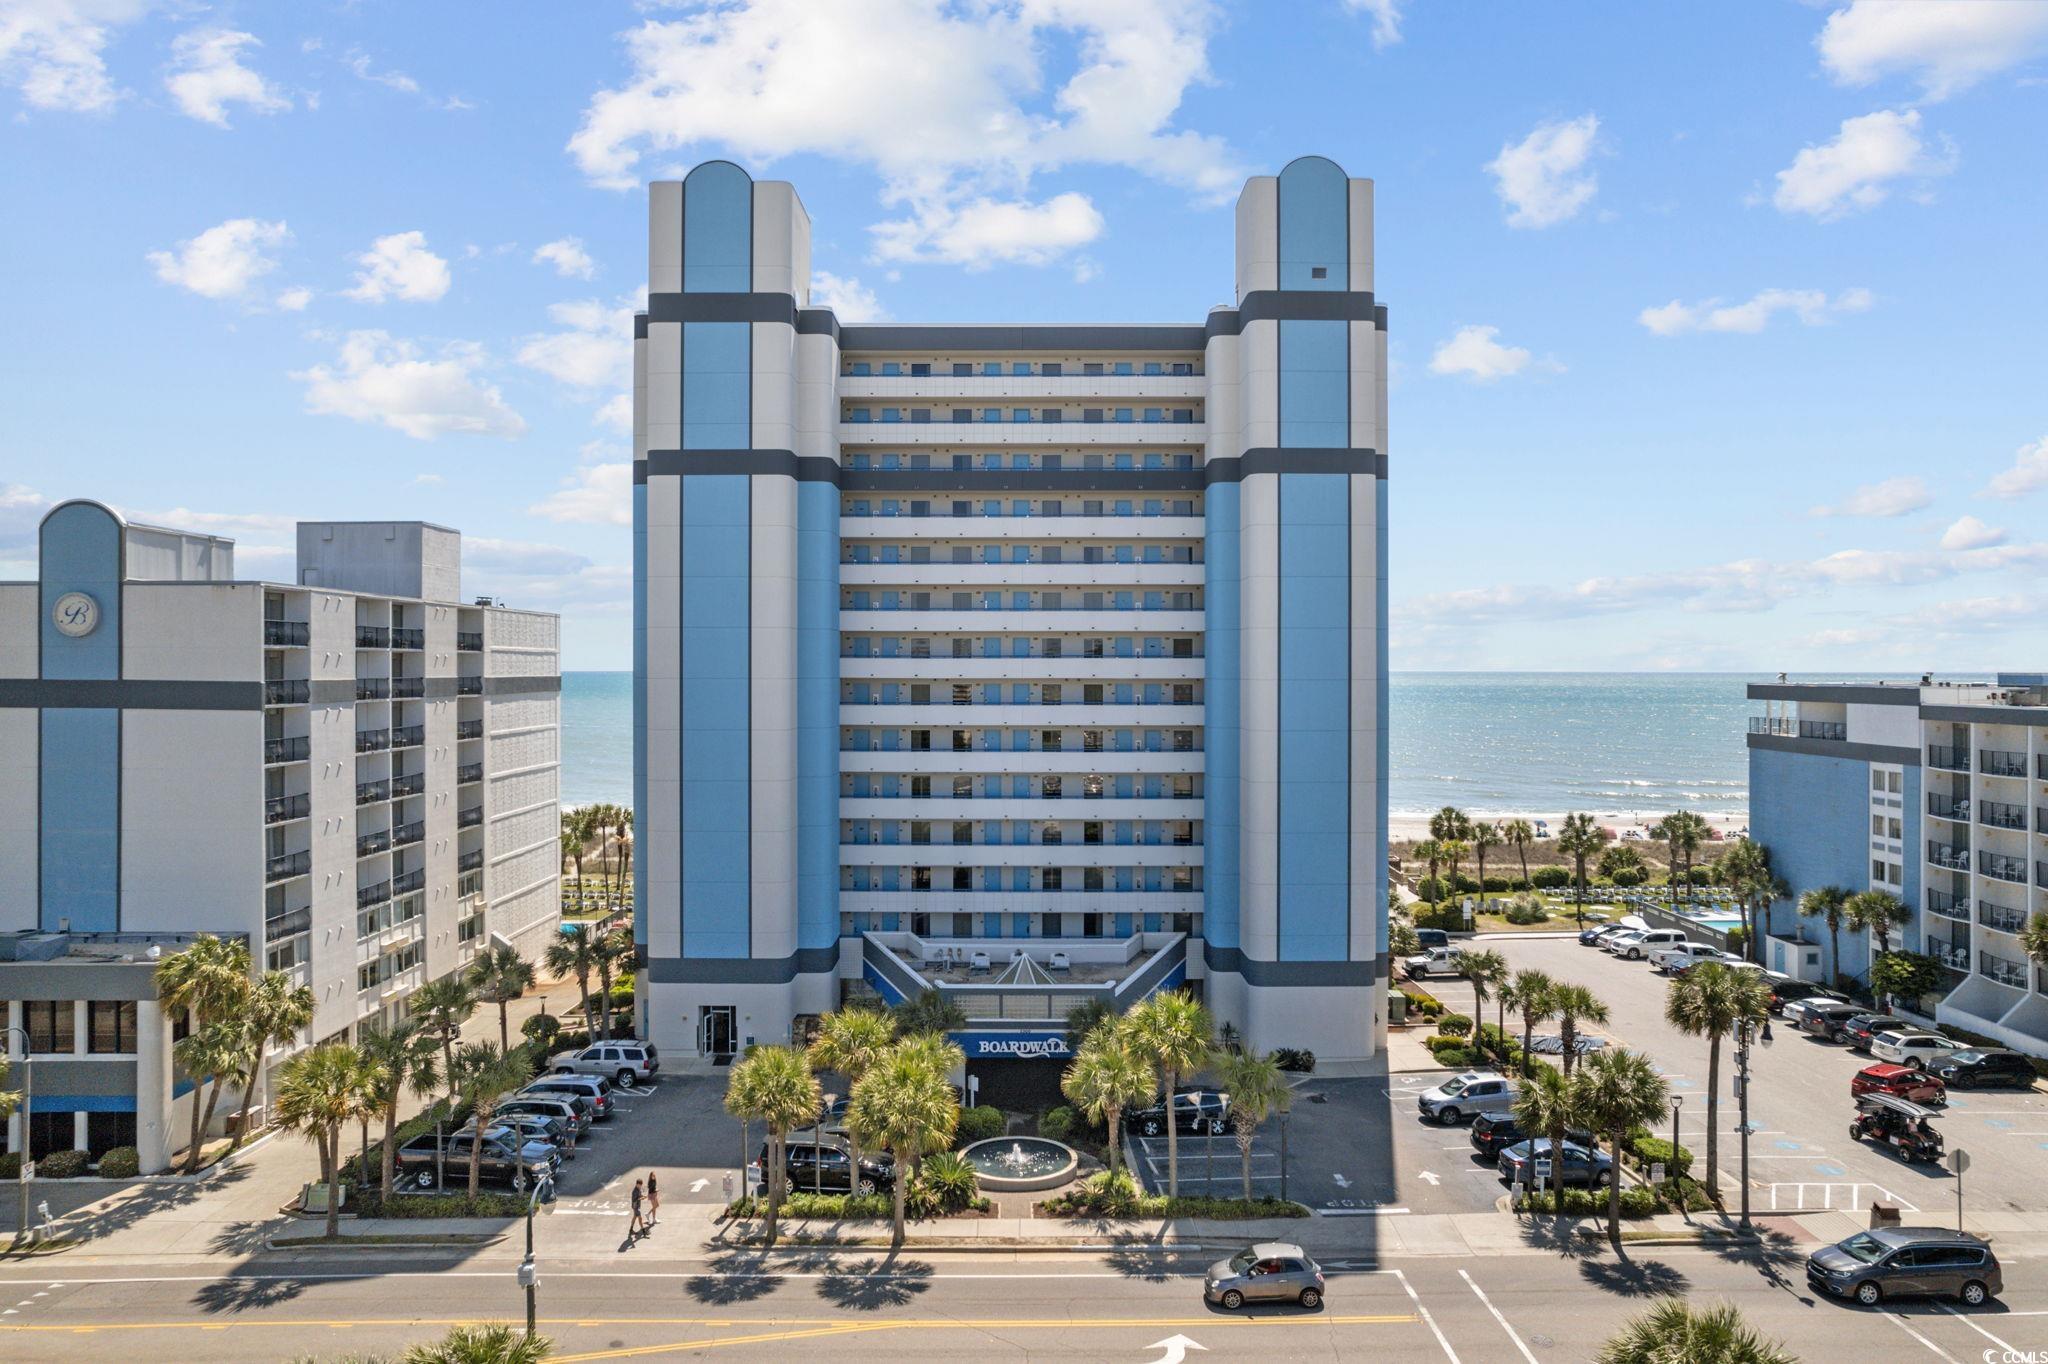 jump into summer revenue with this 1br condo located in boardwalk oceanfront tower.  boardwalk puts you right in the heart of myrtle beach and walking distance to 21st ave restuarants and bars, myrtle beach convention center and all attractions including top golf and broadway at the beach.  condo comes fully furnished and hoa fee includes all utilities.  calendar is already booked up!  get it now!